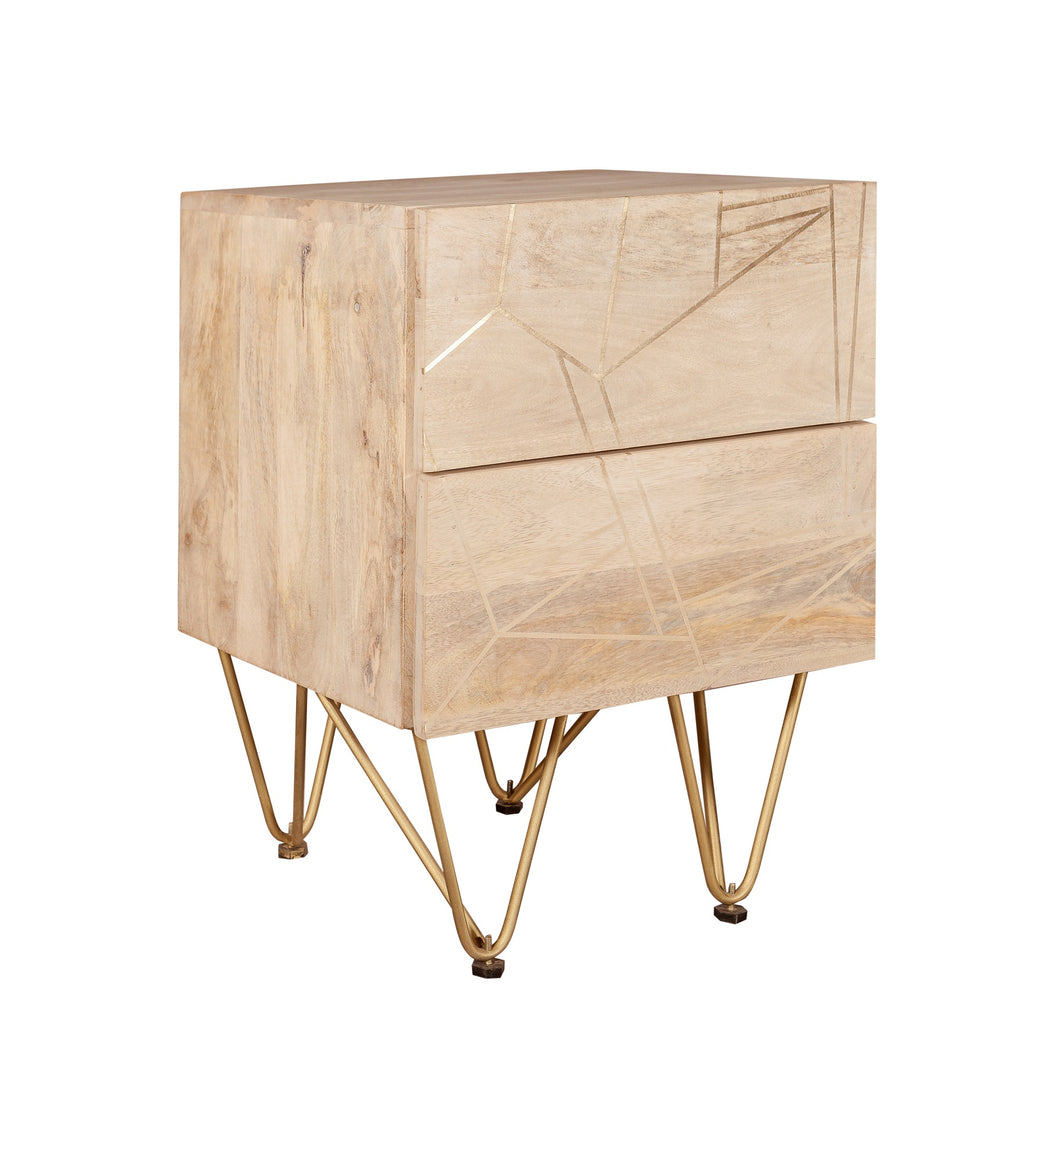 Light Gold 2 Drawer Side Table Indian Hub BRC01 7625987861753 Dimensions: 60cm x 45cm x 40cm (Height x Width x Depth) Drawer/Cupboard: 12 5x37x30 Solid Mango Wood Gold metal inlays Eco-Friendly wood used Partial Assembly required Colour variations due to natural wood colour Made in INDIA This modern contemporary style furniture combining metal inlay on solid wood creating an abstract style is taking the furniture making to a whole new level The angled legs made of metal adds to the retro vintage look